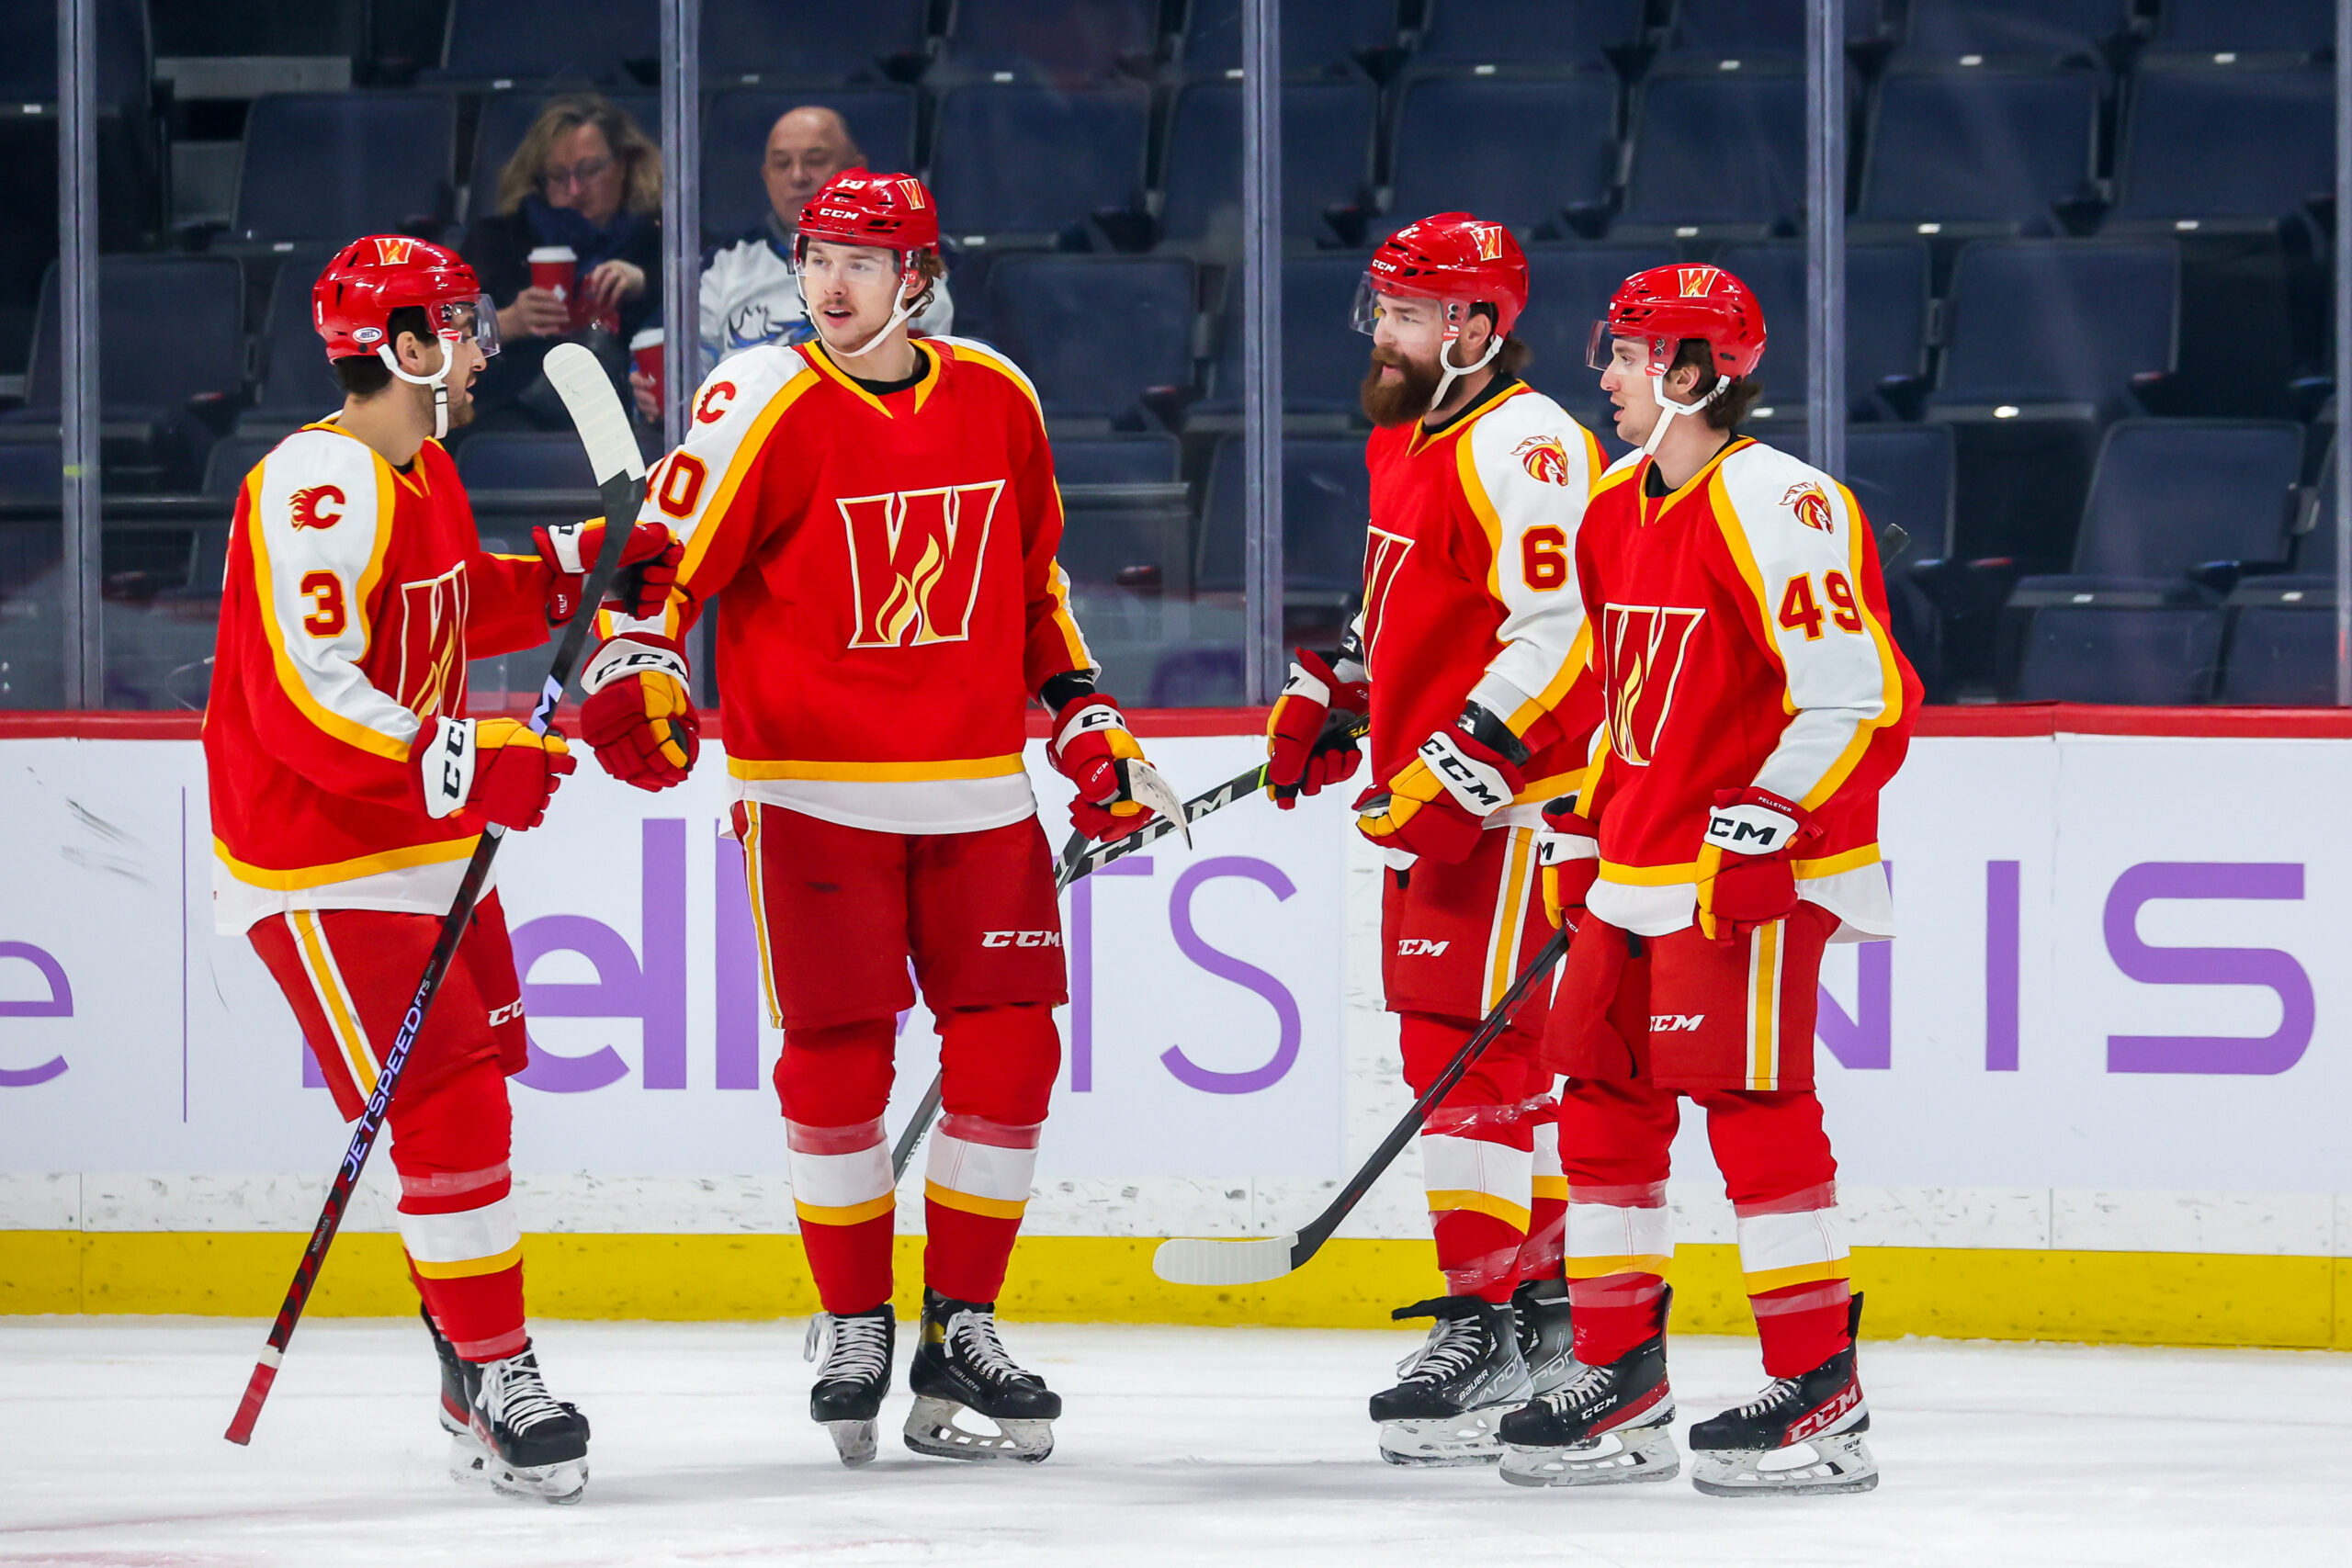 Calgary Wranglers Hockey Scores, Games, Players and Schedules